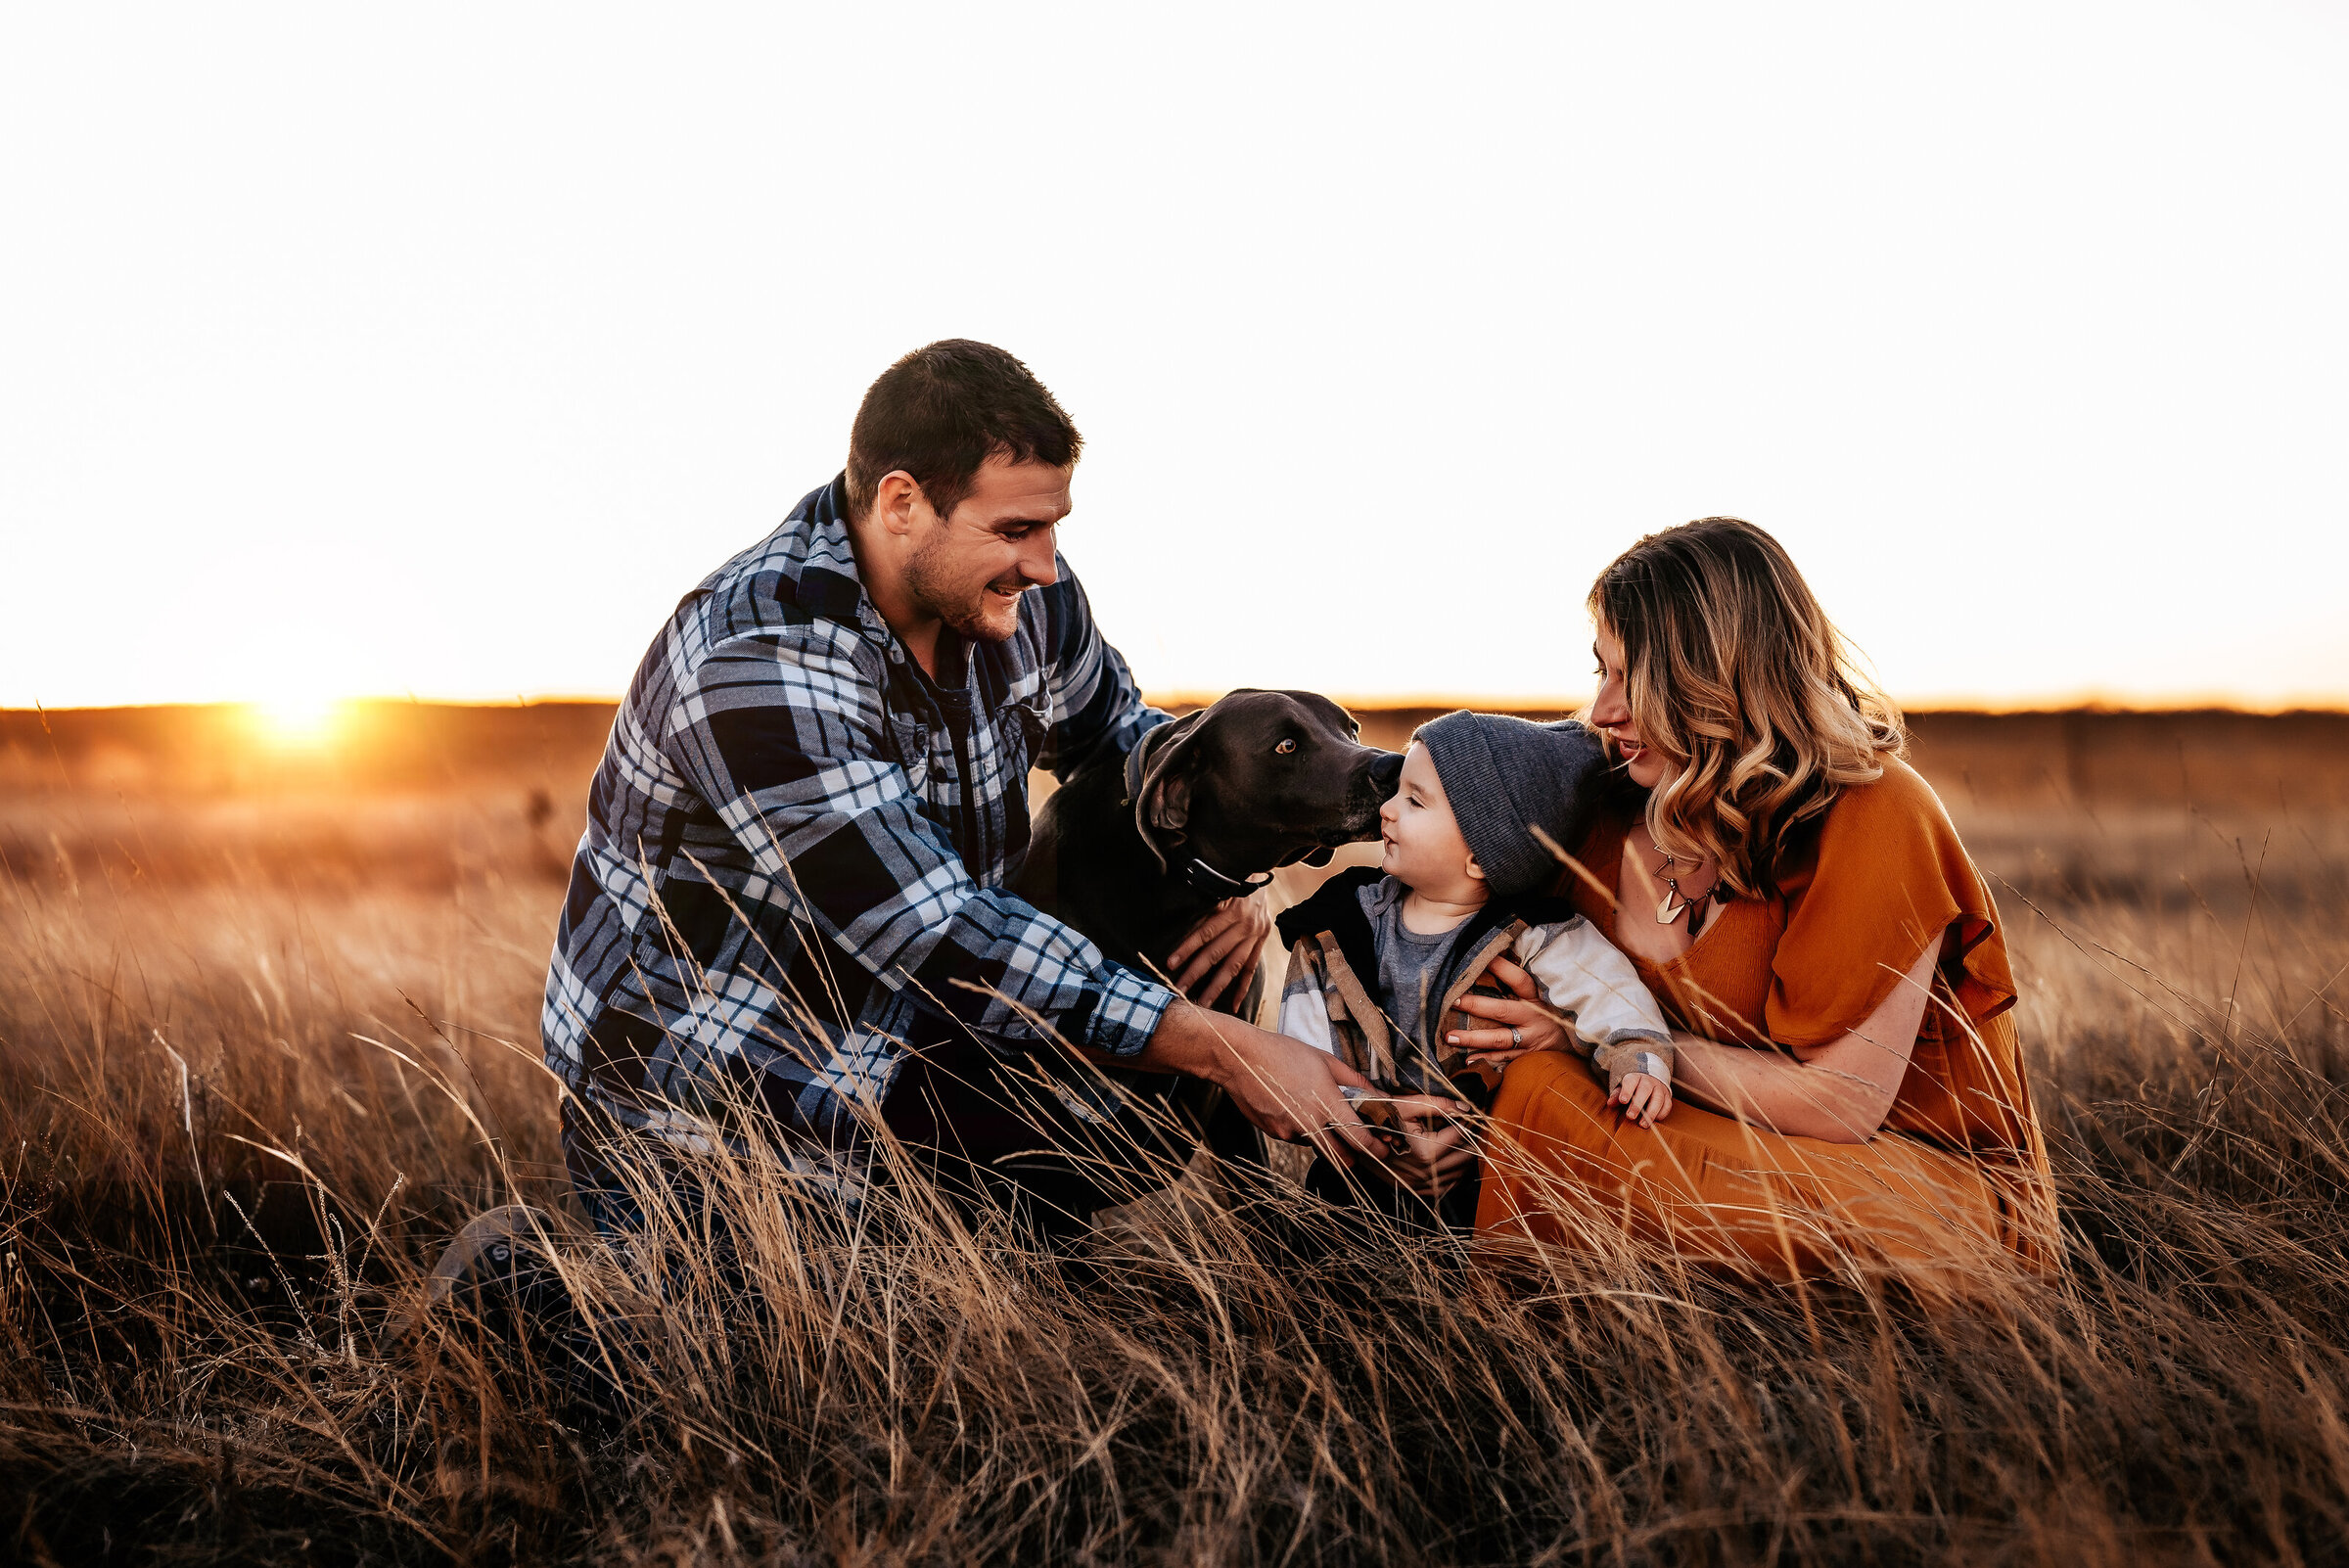 Parents love on dog and kid sitting in field while dog licks face